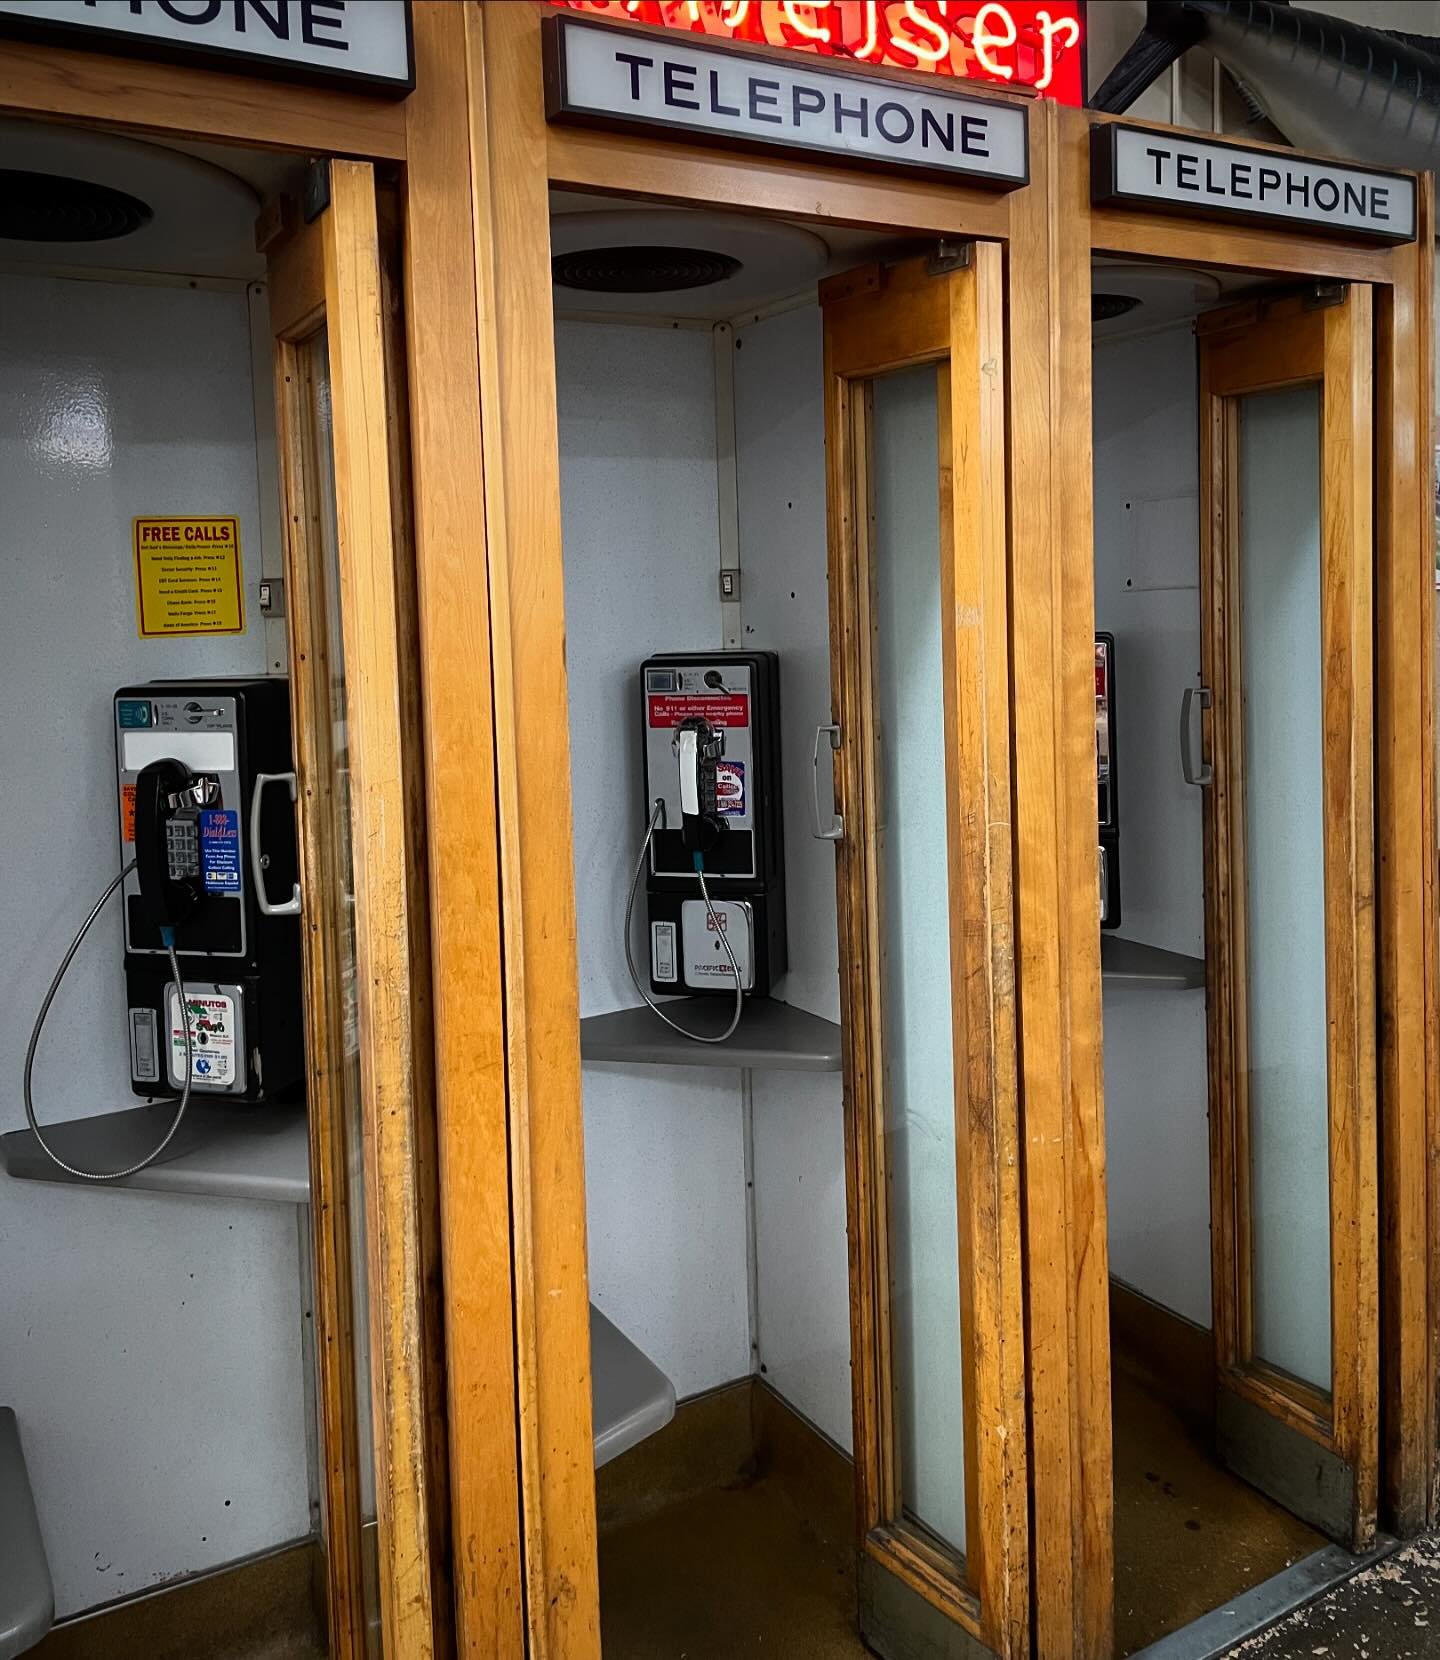 If you know your French Dip sandwiches, you know why this is the tastiest bank of phone booths in Los Angeles&hellip;